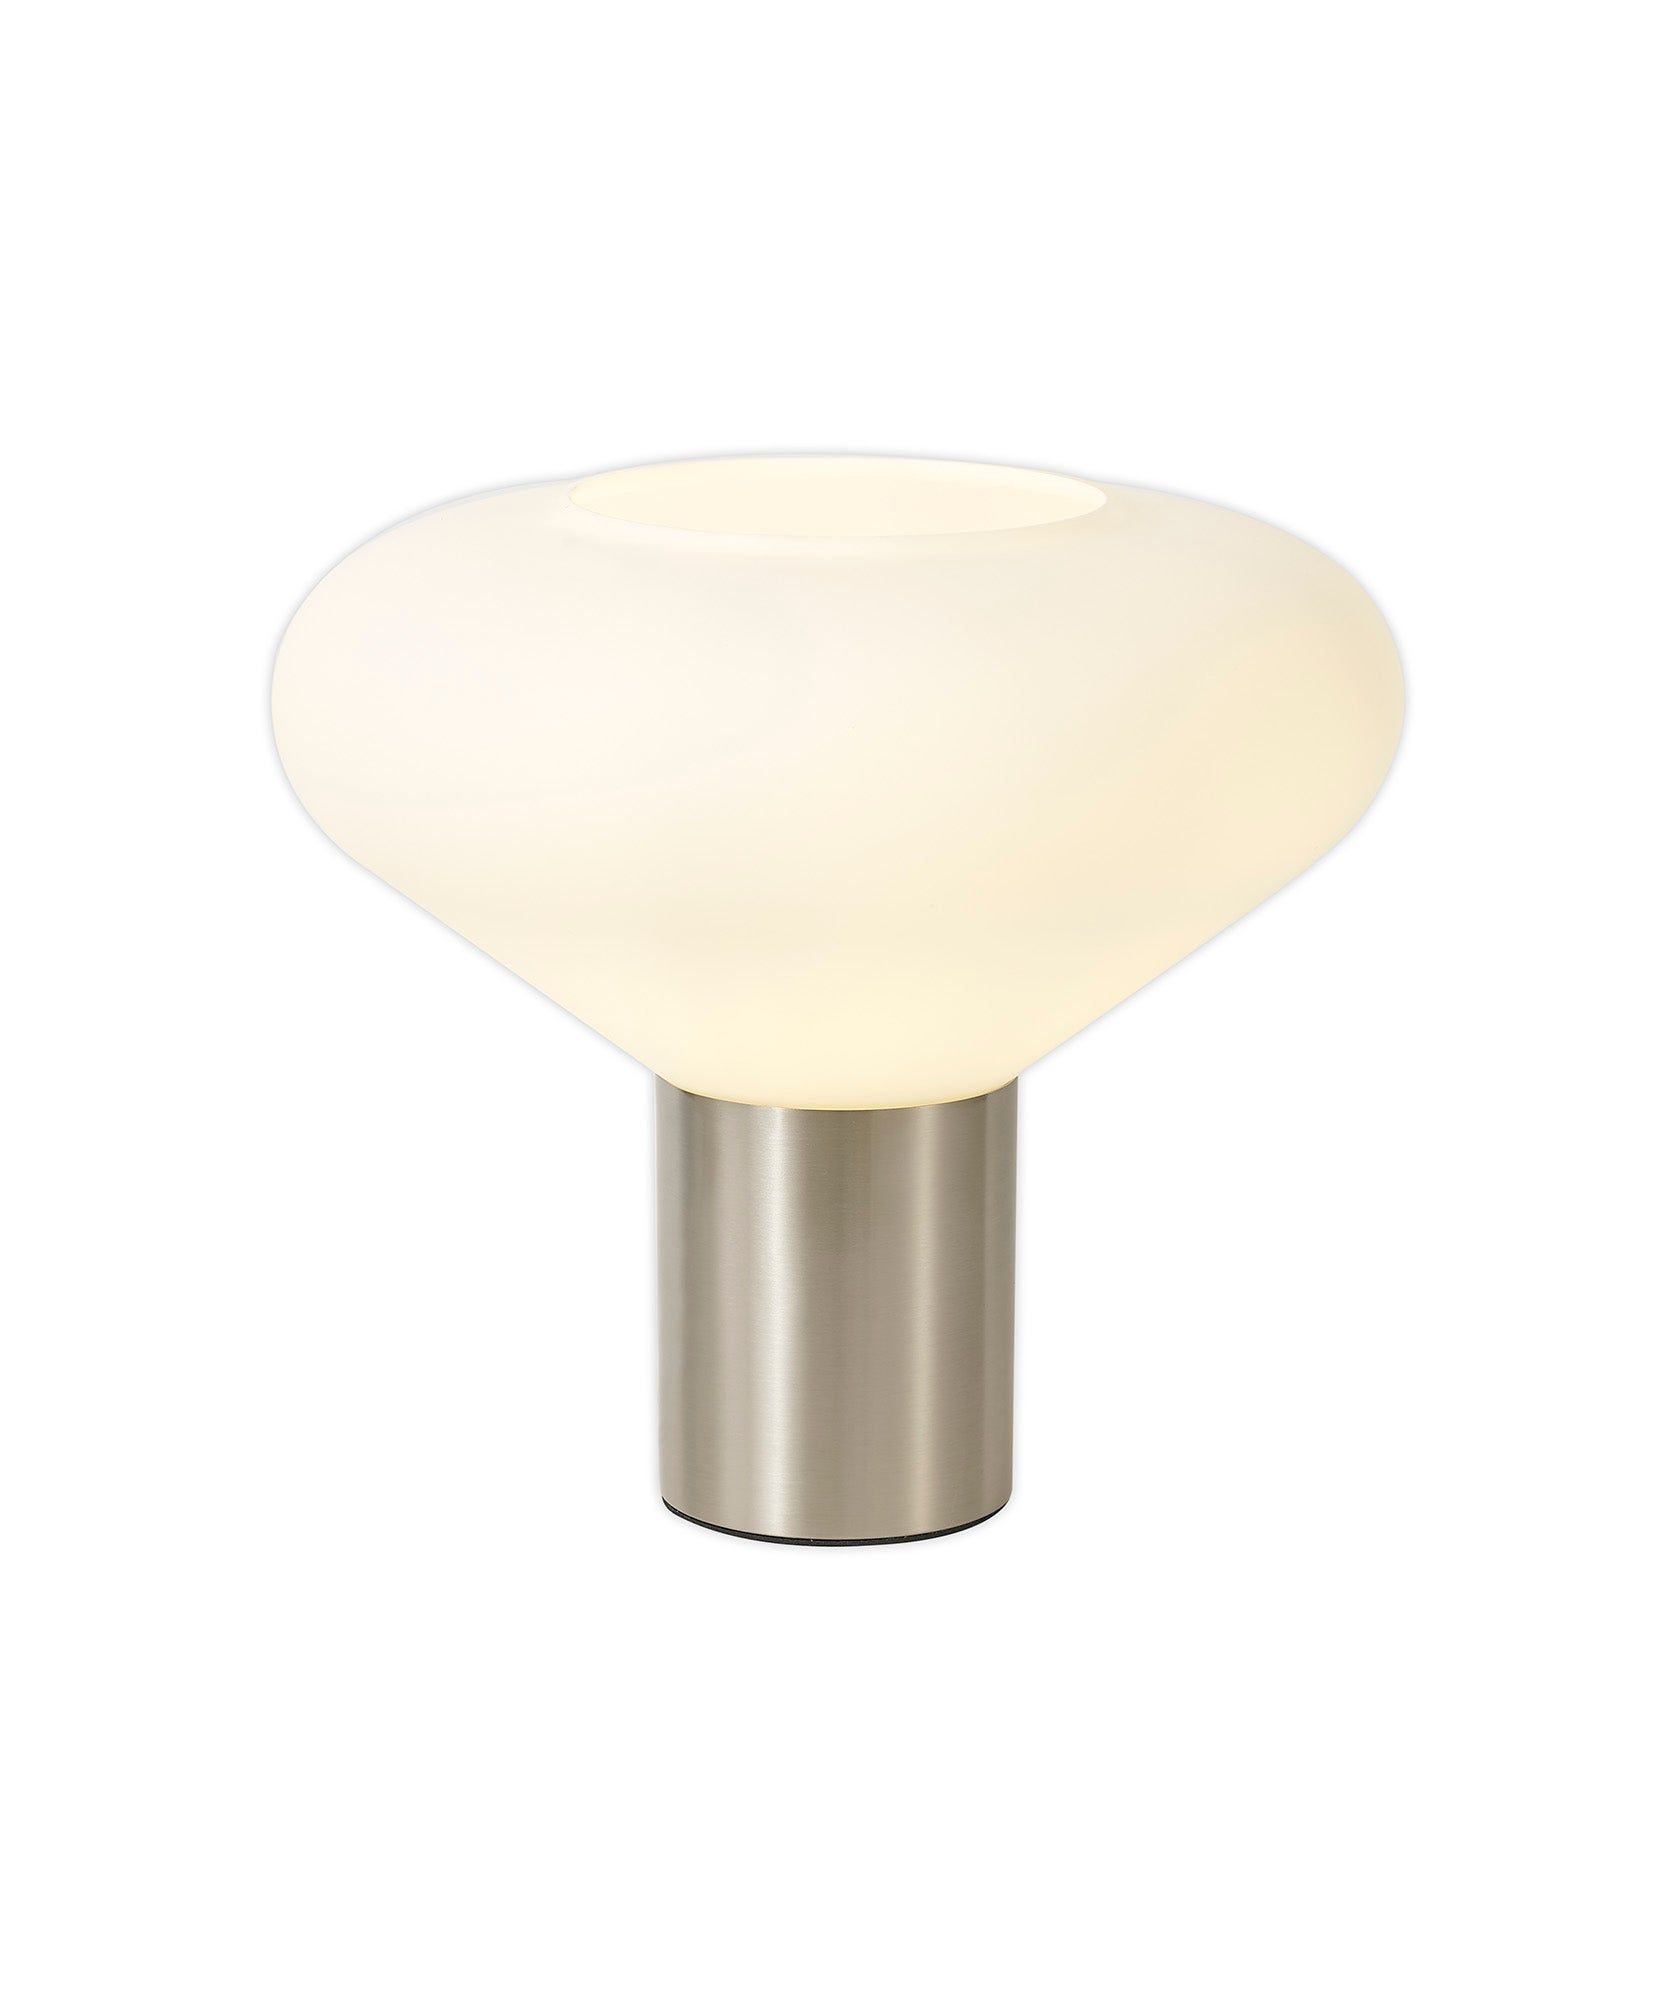 Tuomeb Narrow Table Lamp, Ancient Brass/Clear Glass, Satin Nickel/Opal Glass